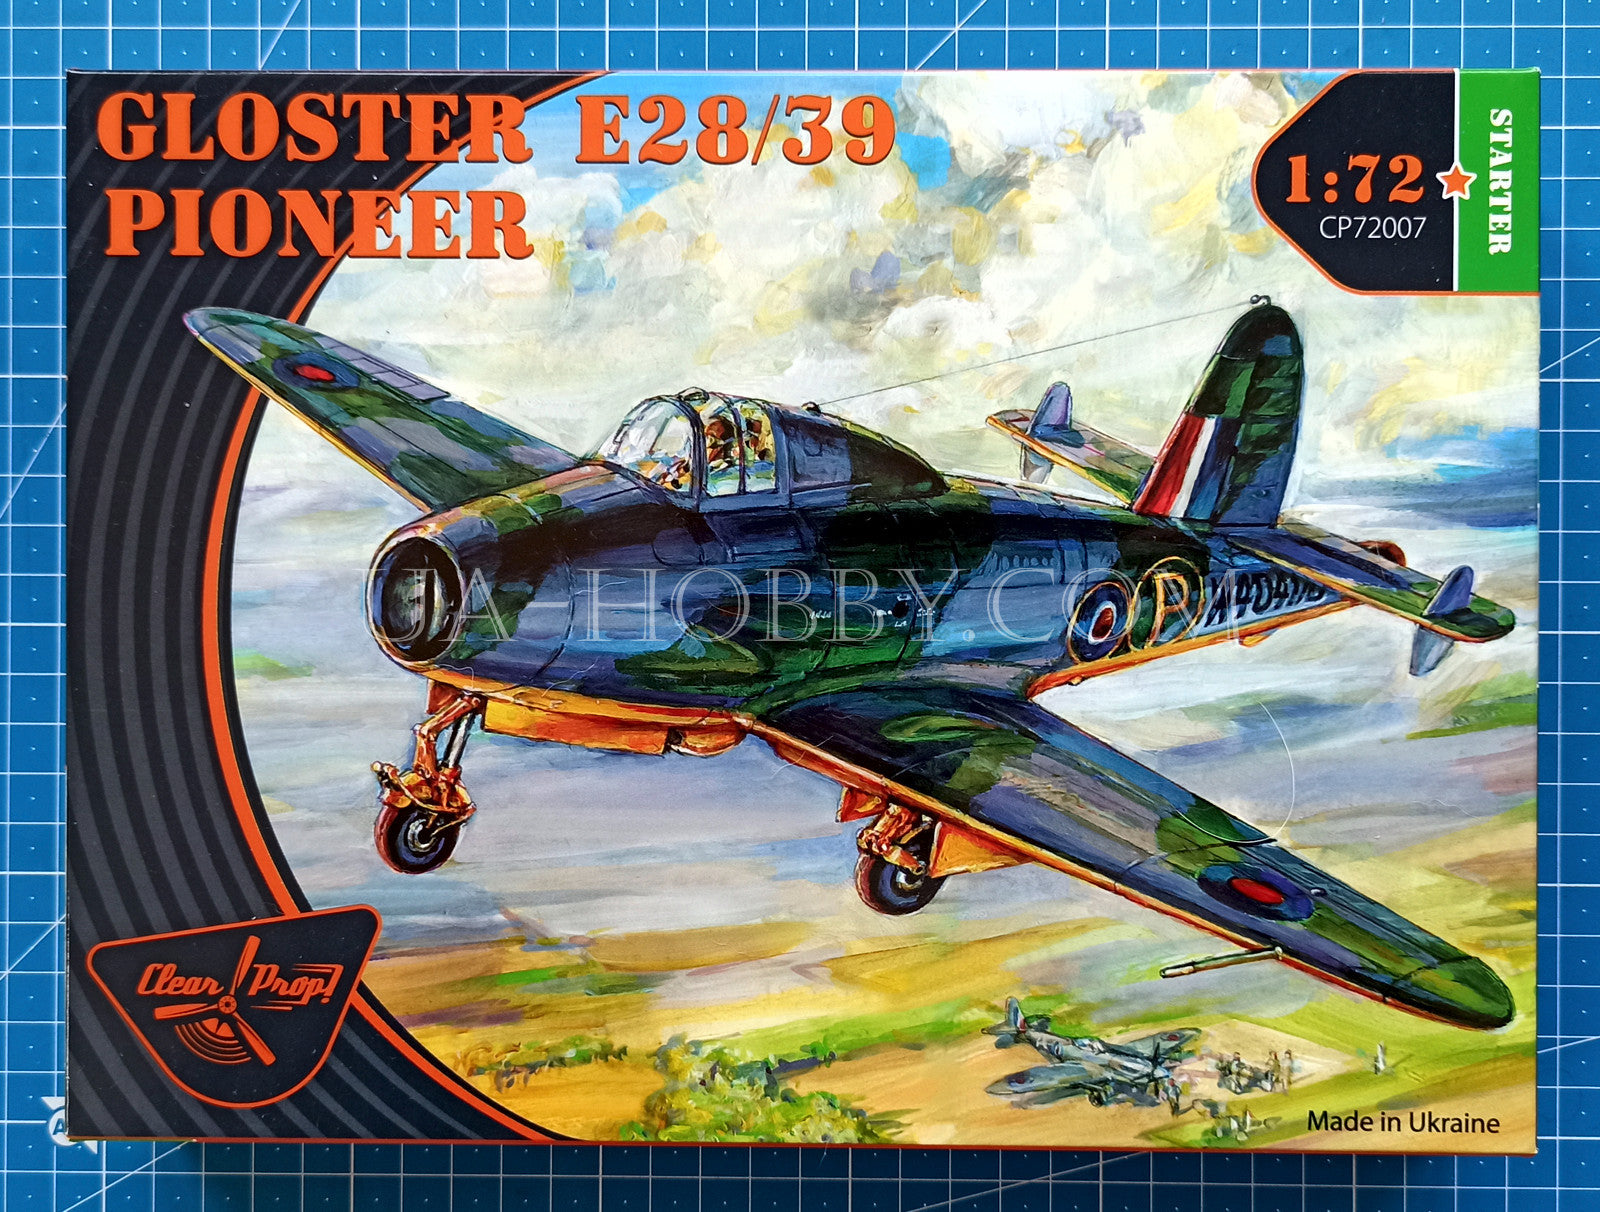 1/72 Gloster E28/39 Pioneer. Clear Prop! CP72007